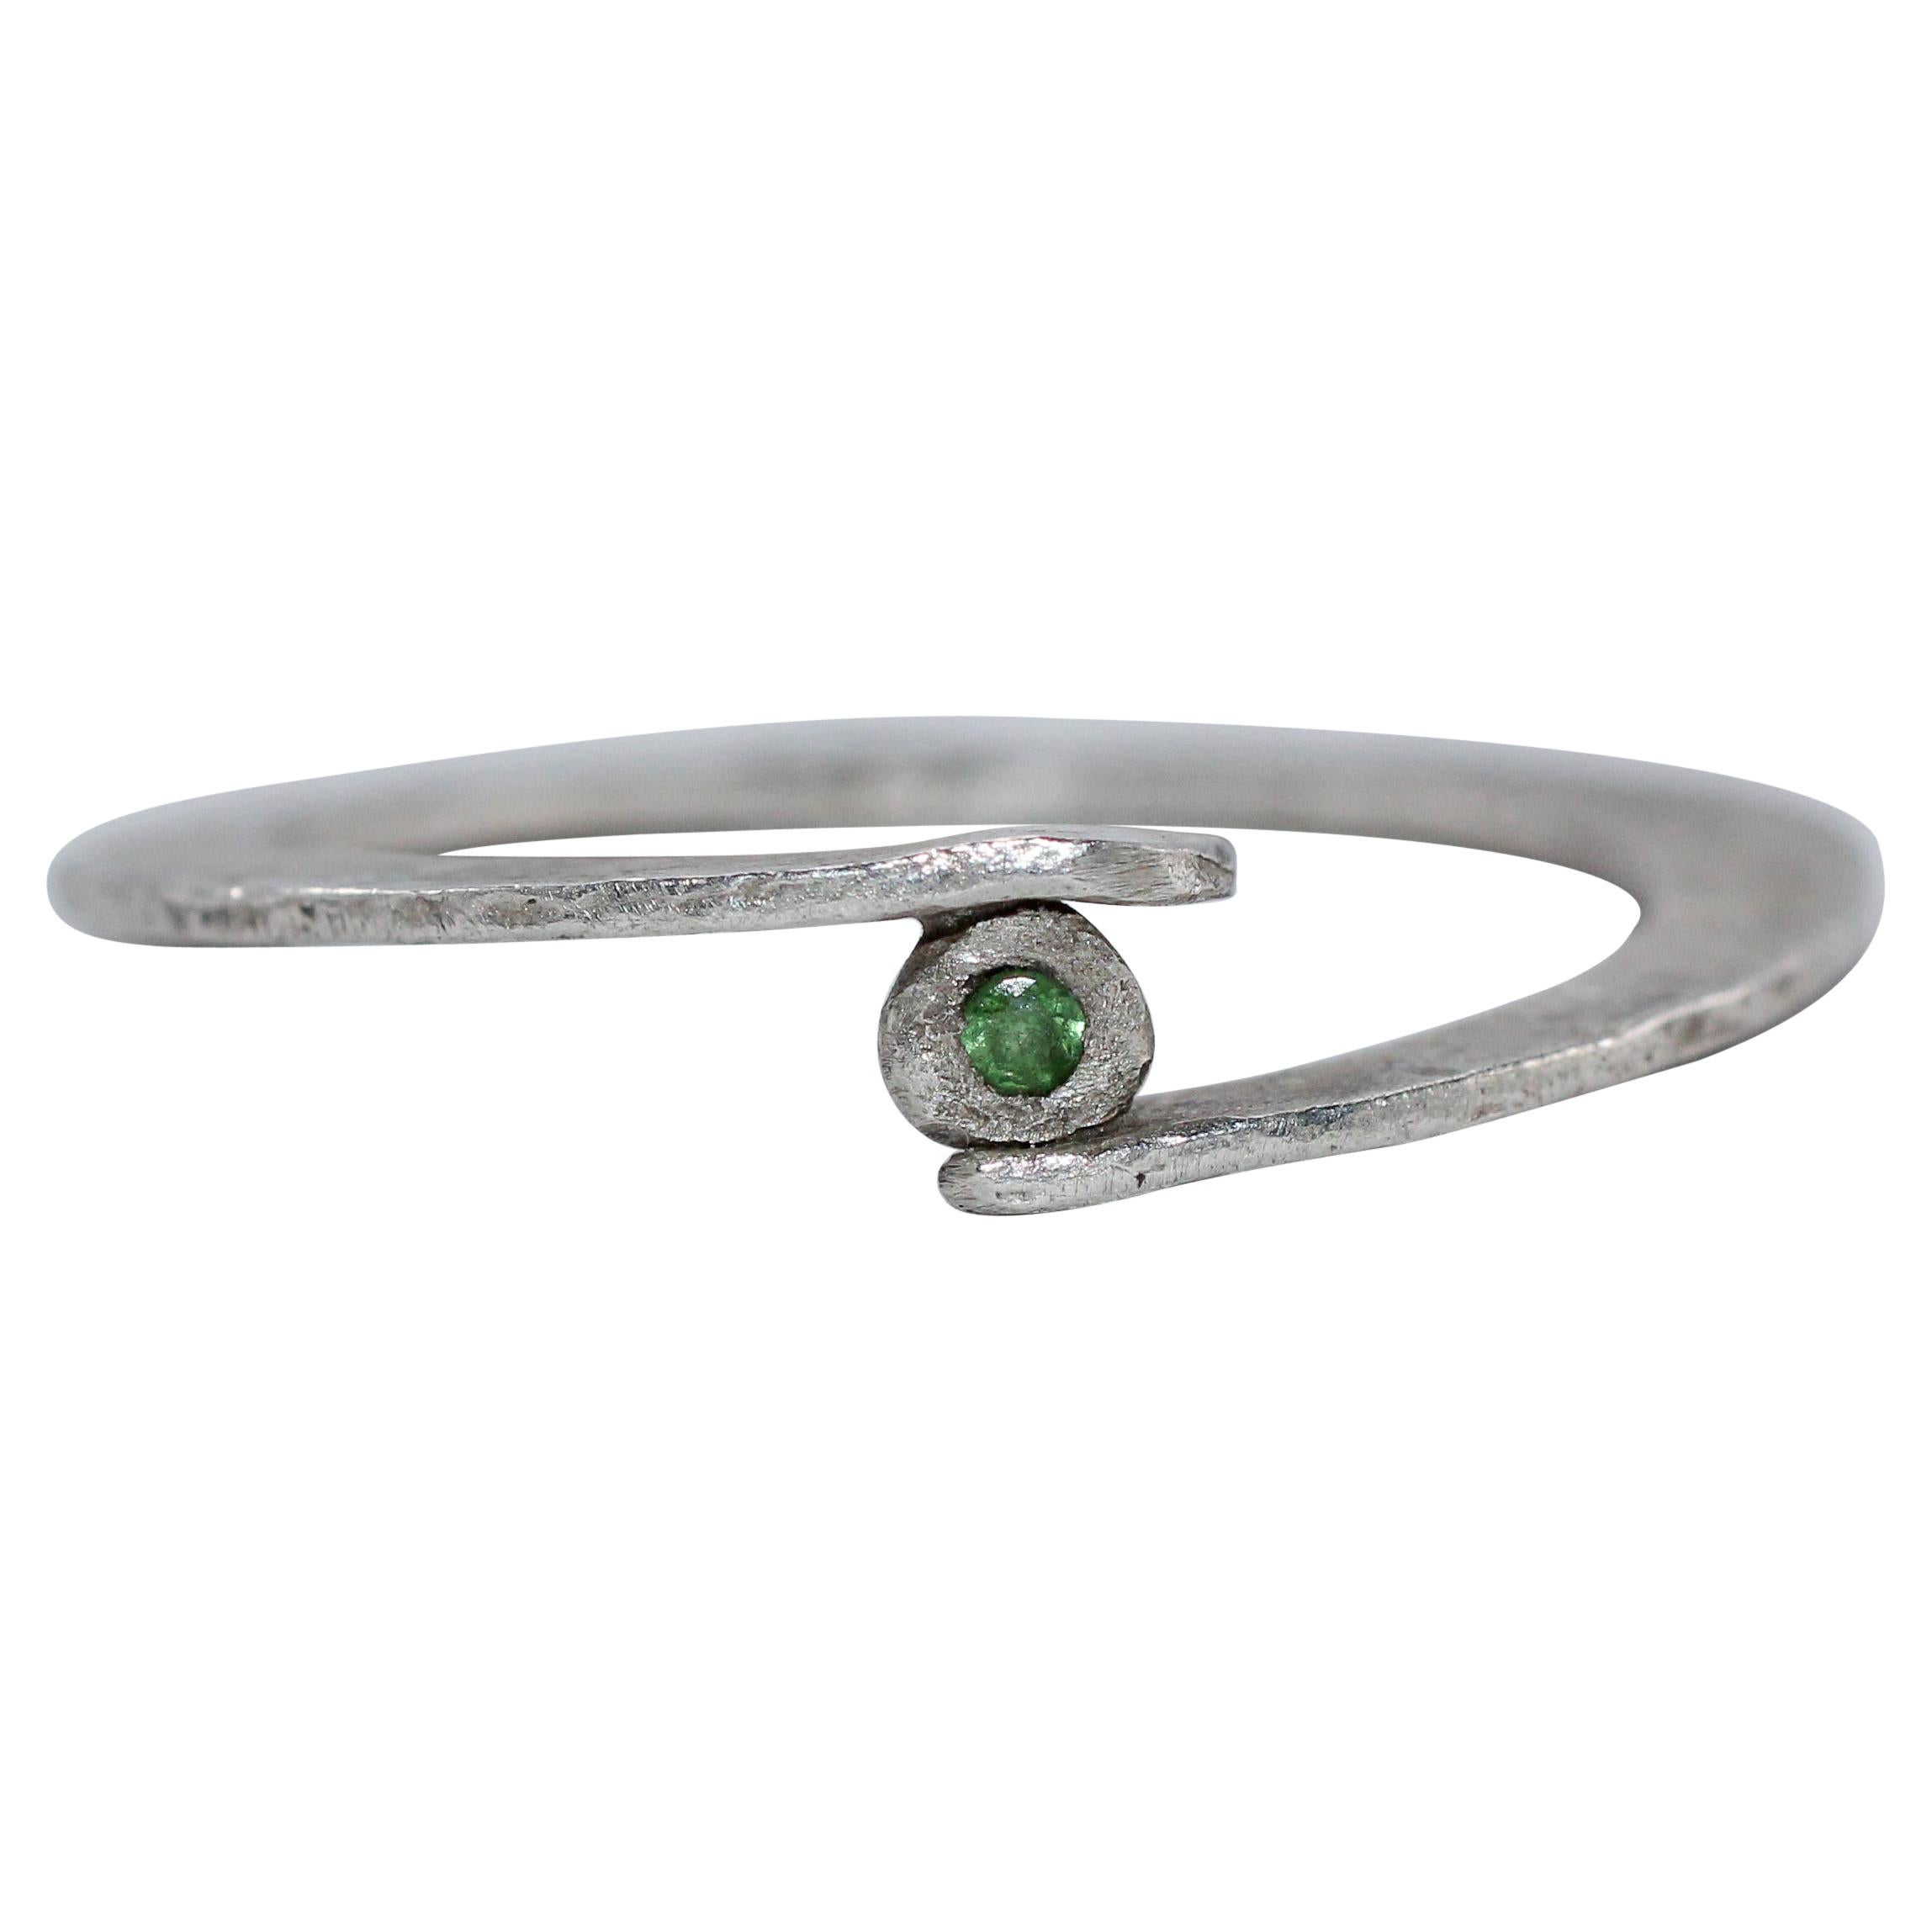 Tsavorite Garnet Sterling Silver Fashion Ring More Stack Designs AB Jewelry NYC For Sale